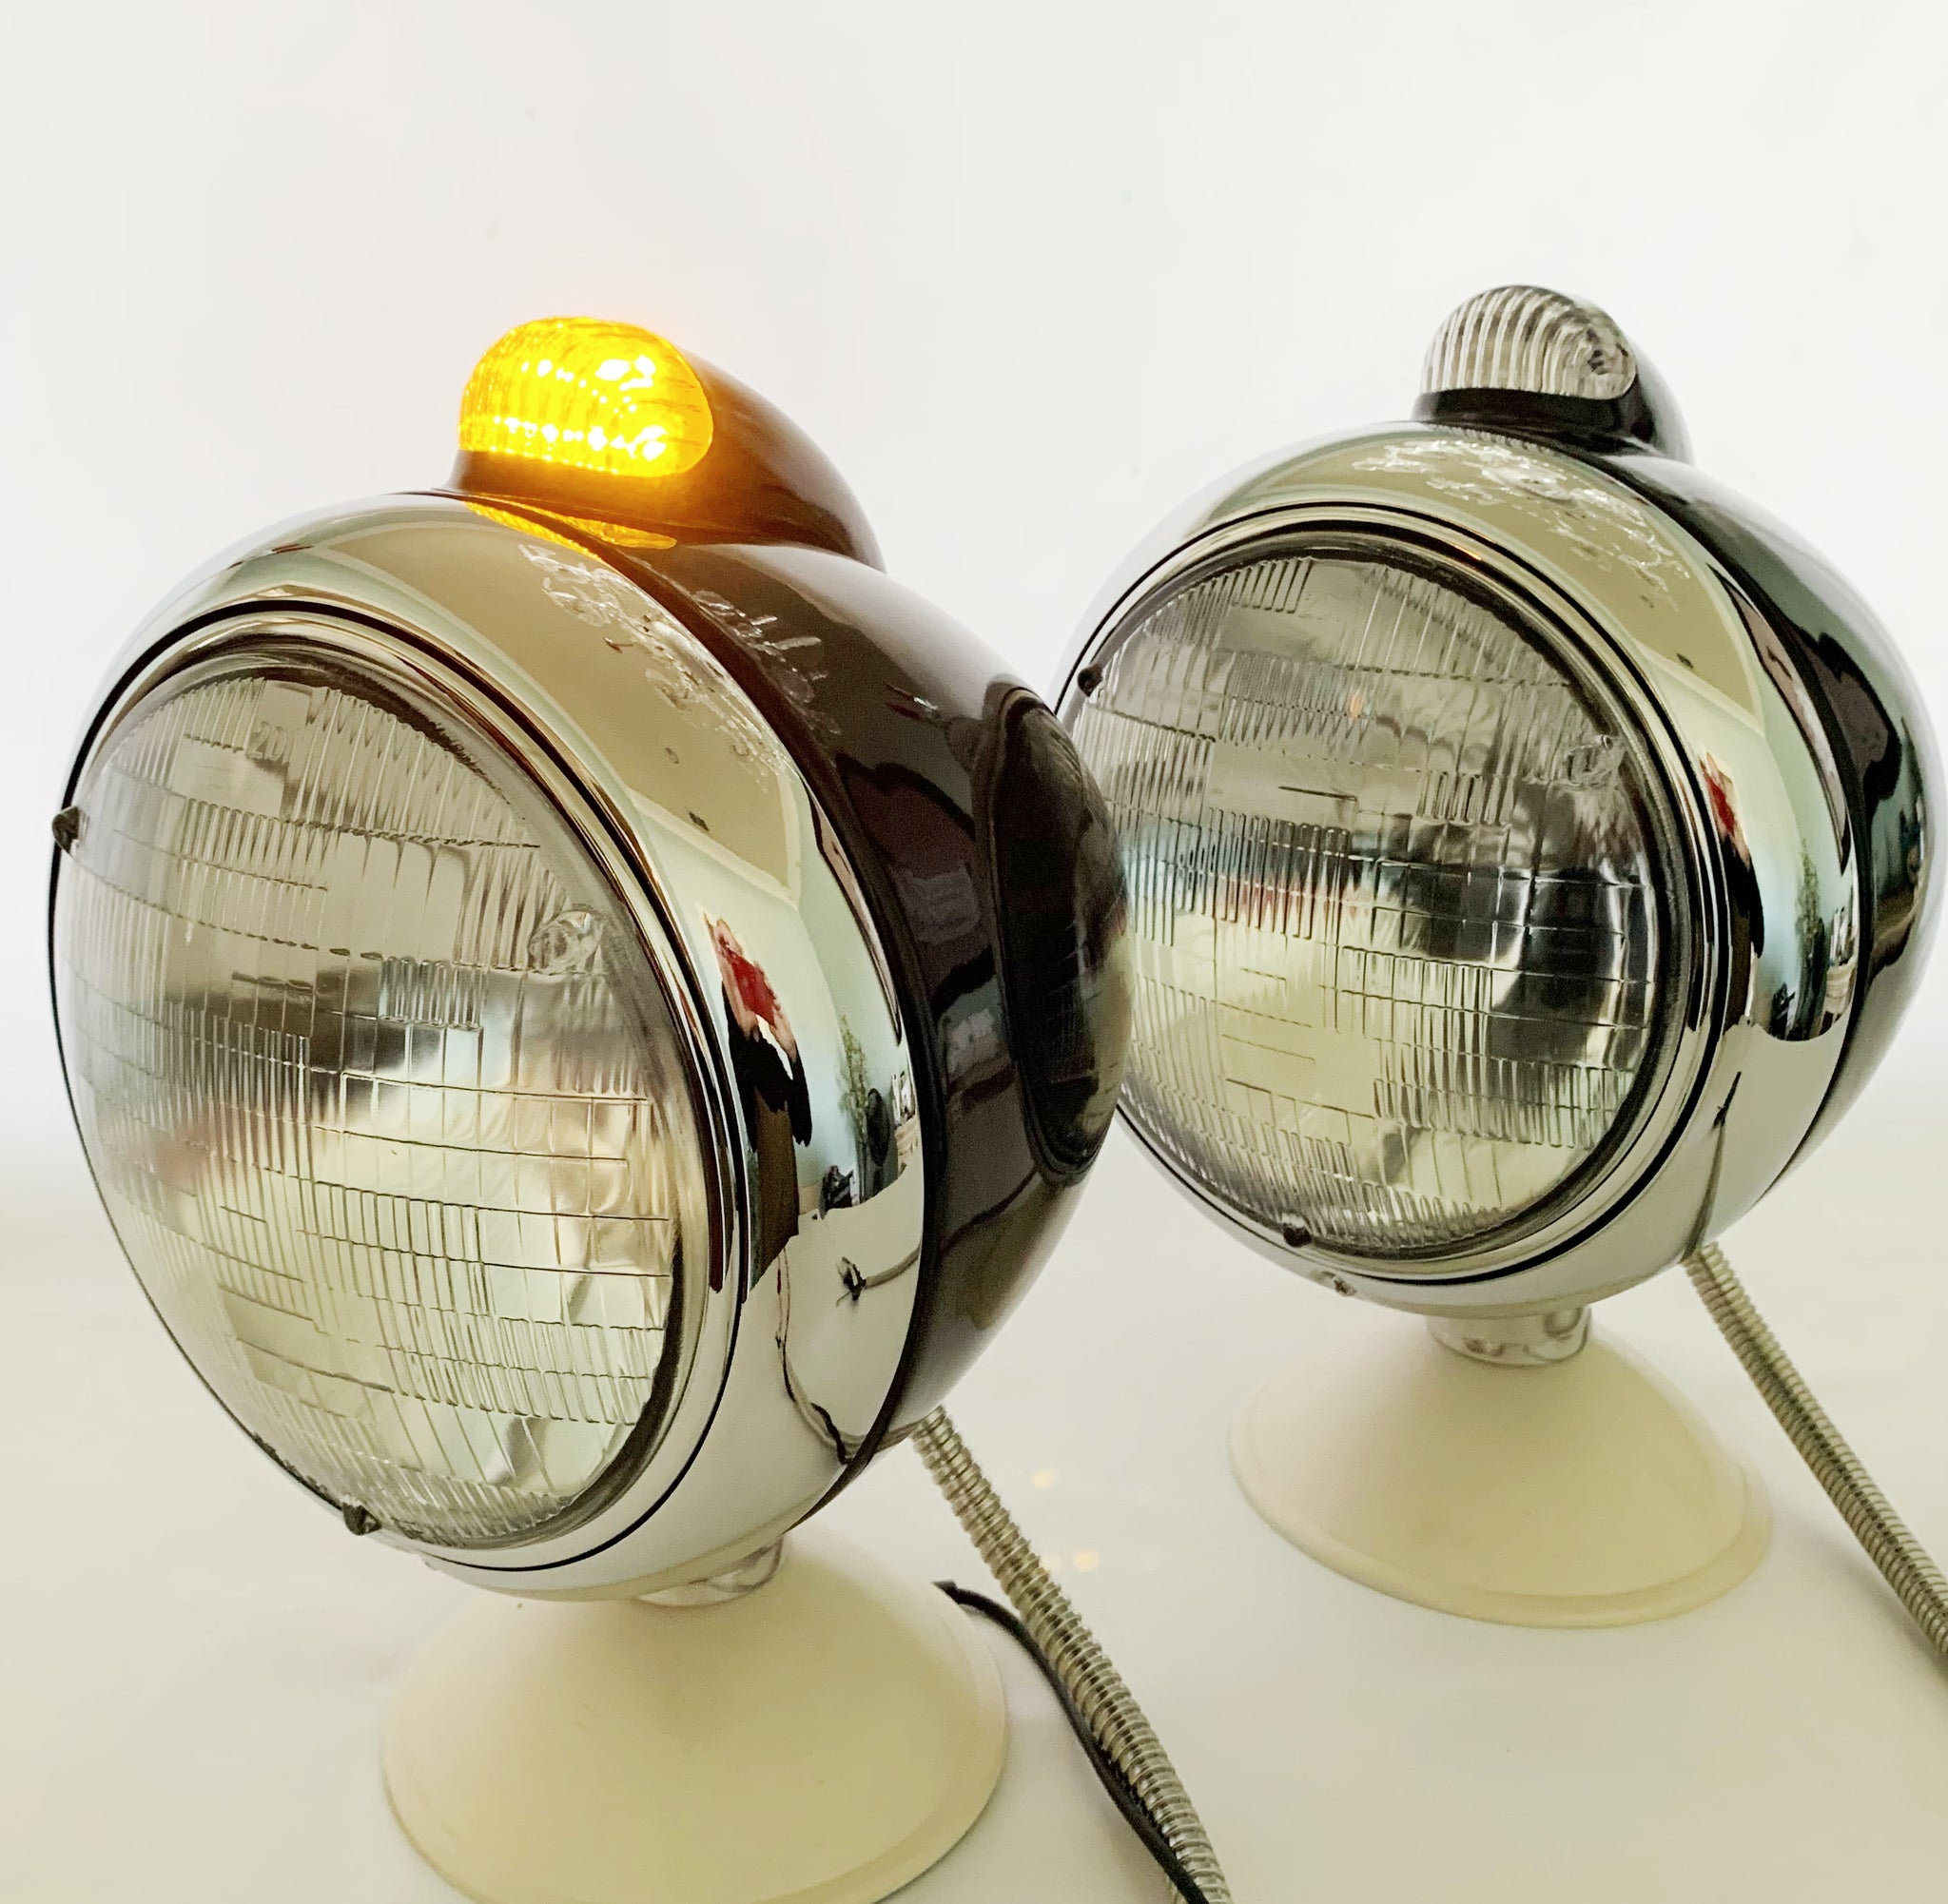 Guide Style Headlights with LED Top Light - 1pr